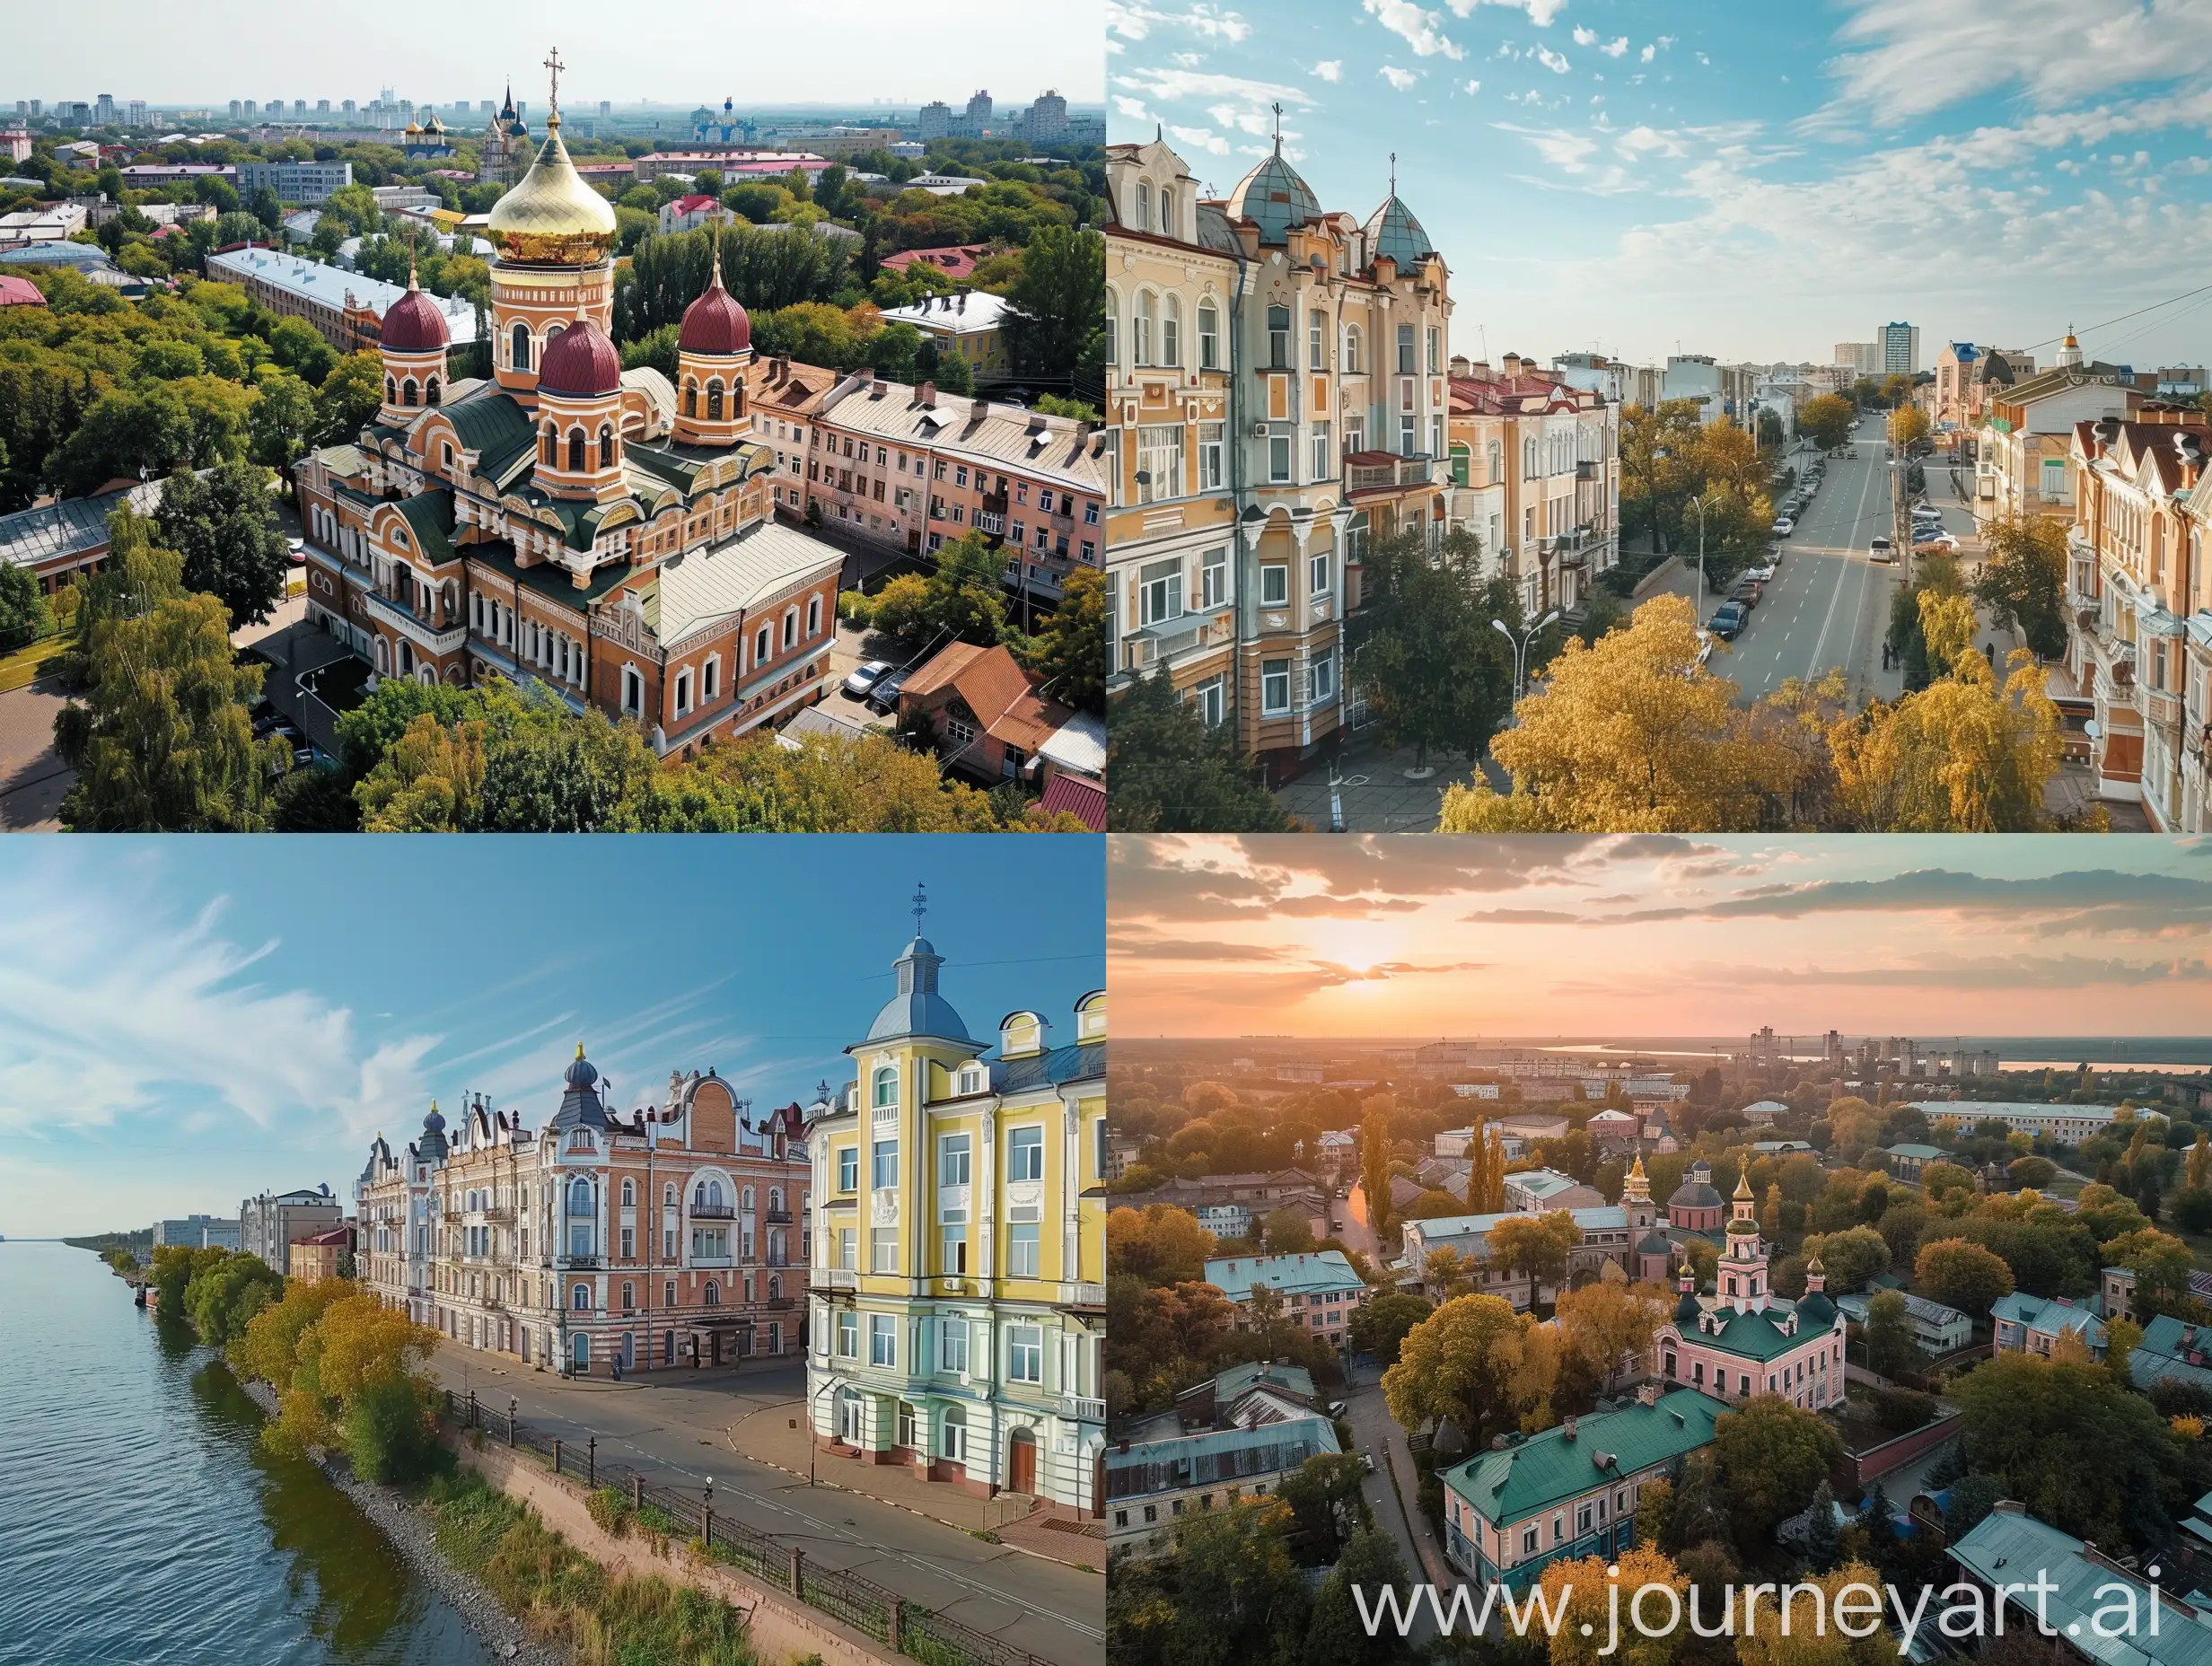 Scenic-Beauty-of-Taganrog-City-Captured-in-Stunning-Image